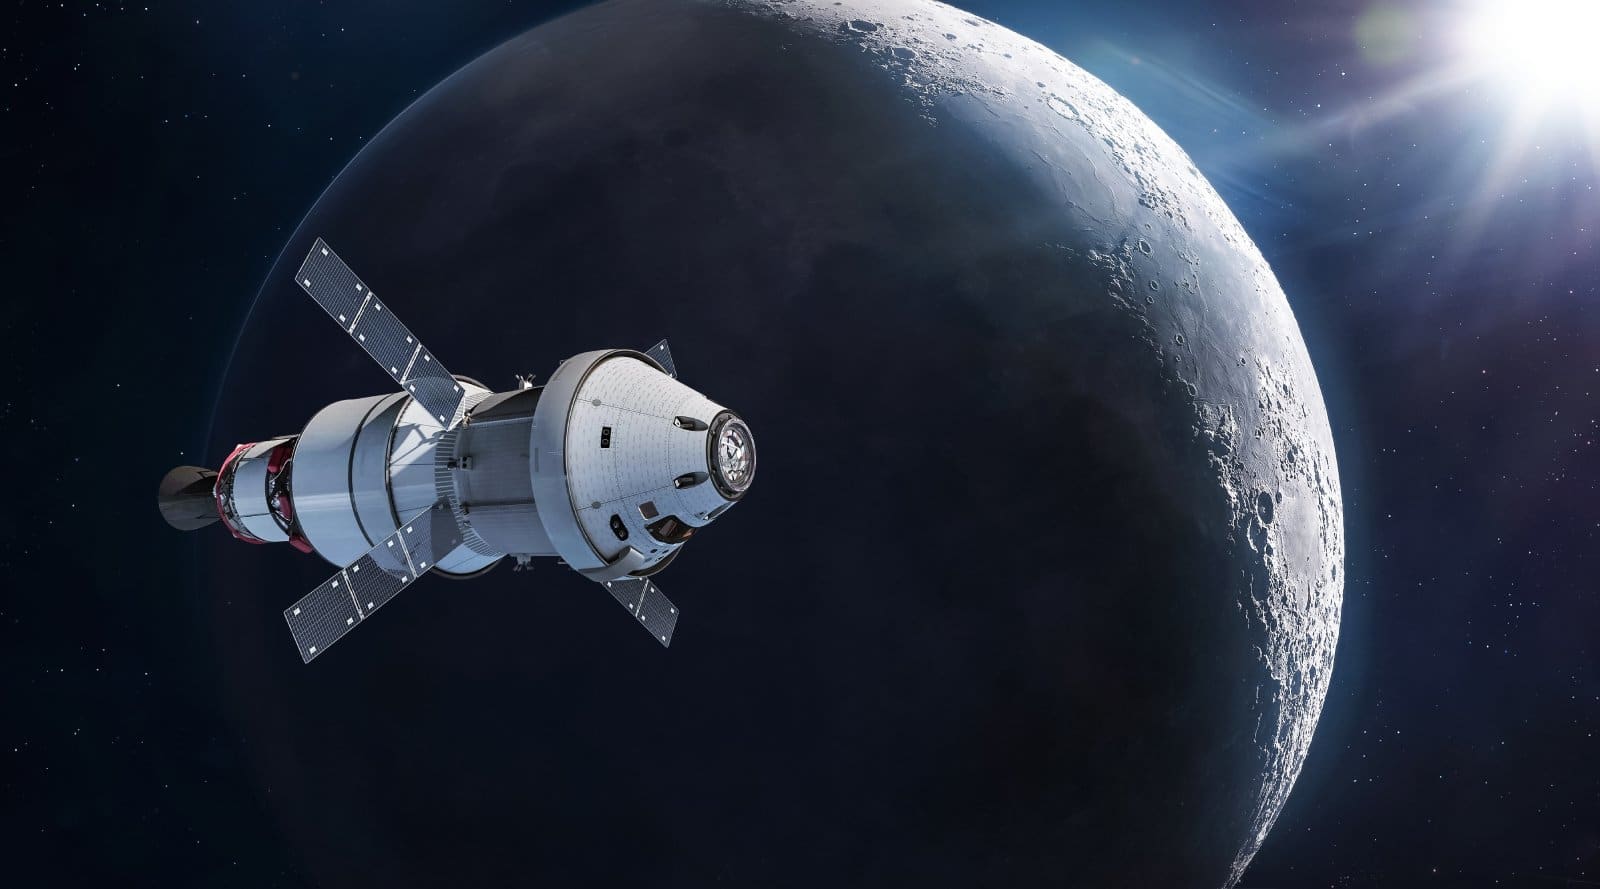 <p class="wp-caption-text">Image Credit: Shutterstock / Dima Zel</p>  <p><span>Orbital spaceflights are the next frontier for private space tourism, offering an extended stay in low Earth orbit. This experience goes beyond the brief moments of weightlessness, allowing you to live and move in space, witnessing multiple sunrises and sunsets in a single day from the vantage point of a spacecraft. Currently, this level of space travel is offered by companies like SpaceX, which plans to use its Crew Dragon spacecraft to transport private citizens to orbit.</span></p> <p><span>While aboard, you’ll experience life as modern astronauts, from sleeping in zero gravity to observing the Earth from a unique orbital perspective. The journey is about experiencing the day-to-day life of an astronaut, making it a profoundly transformative experience.</span></p> <p><b>Insider’s Tip:</b><span> Engage in a rigorous pre-flight conditioning regimen to ensure you can fully enjoy and participate in the activities and demands of living in space.</span></p>